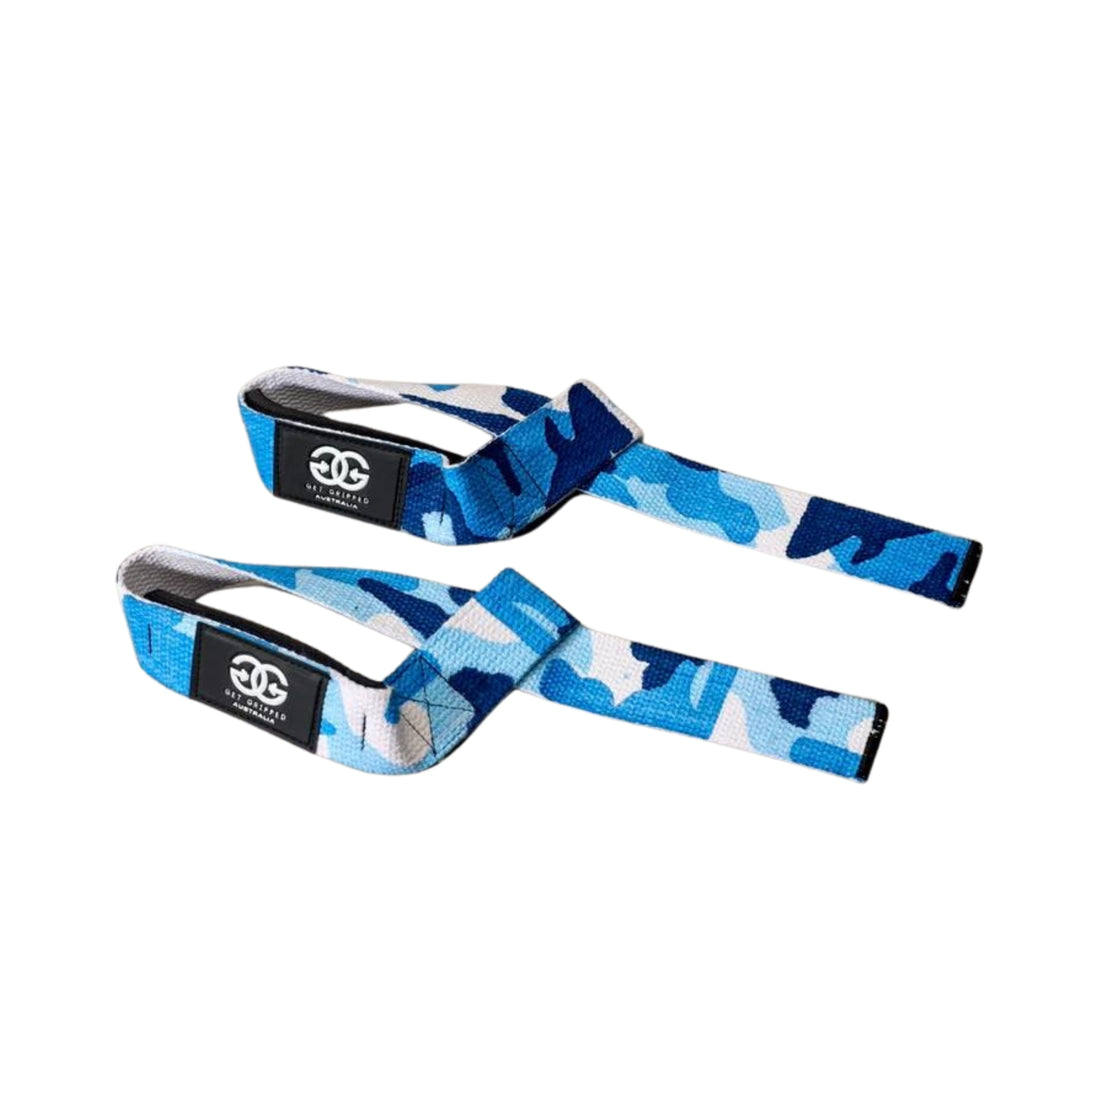 Get Gripped Single Tail Strap Blue Camo